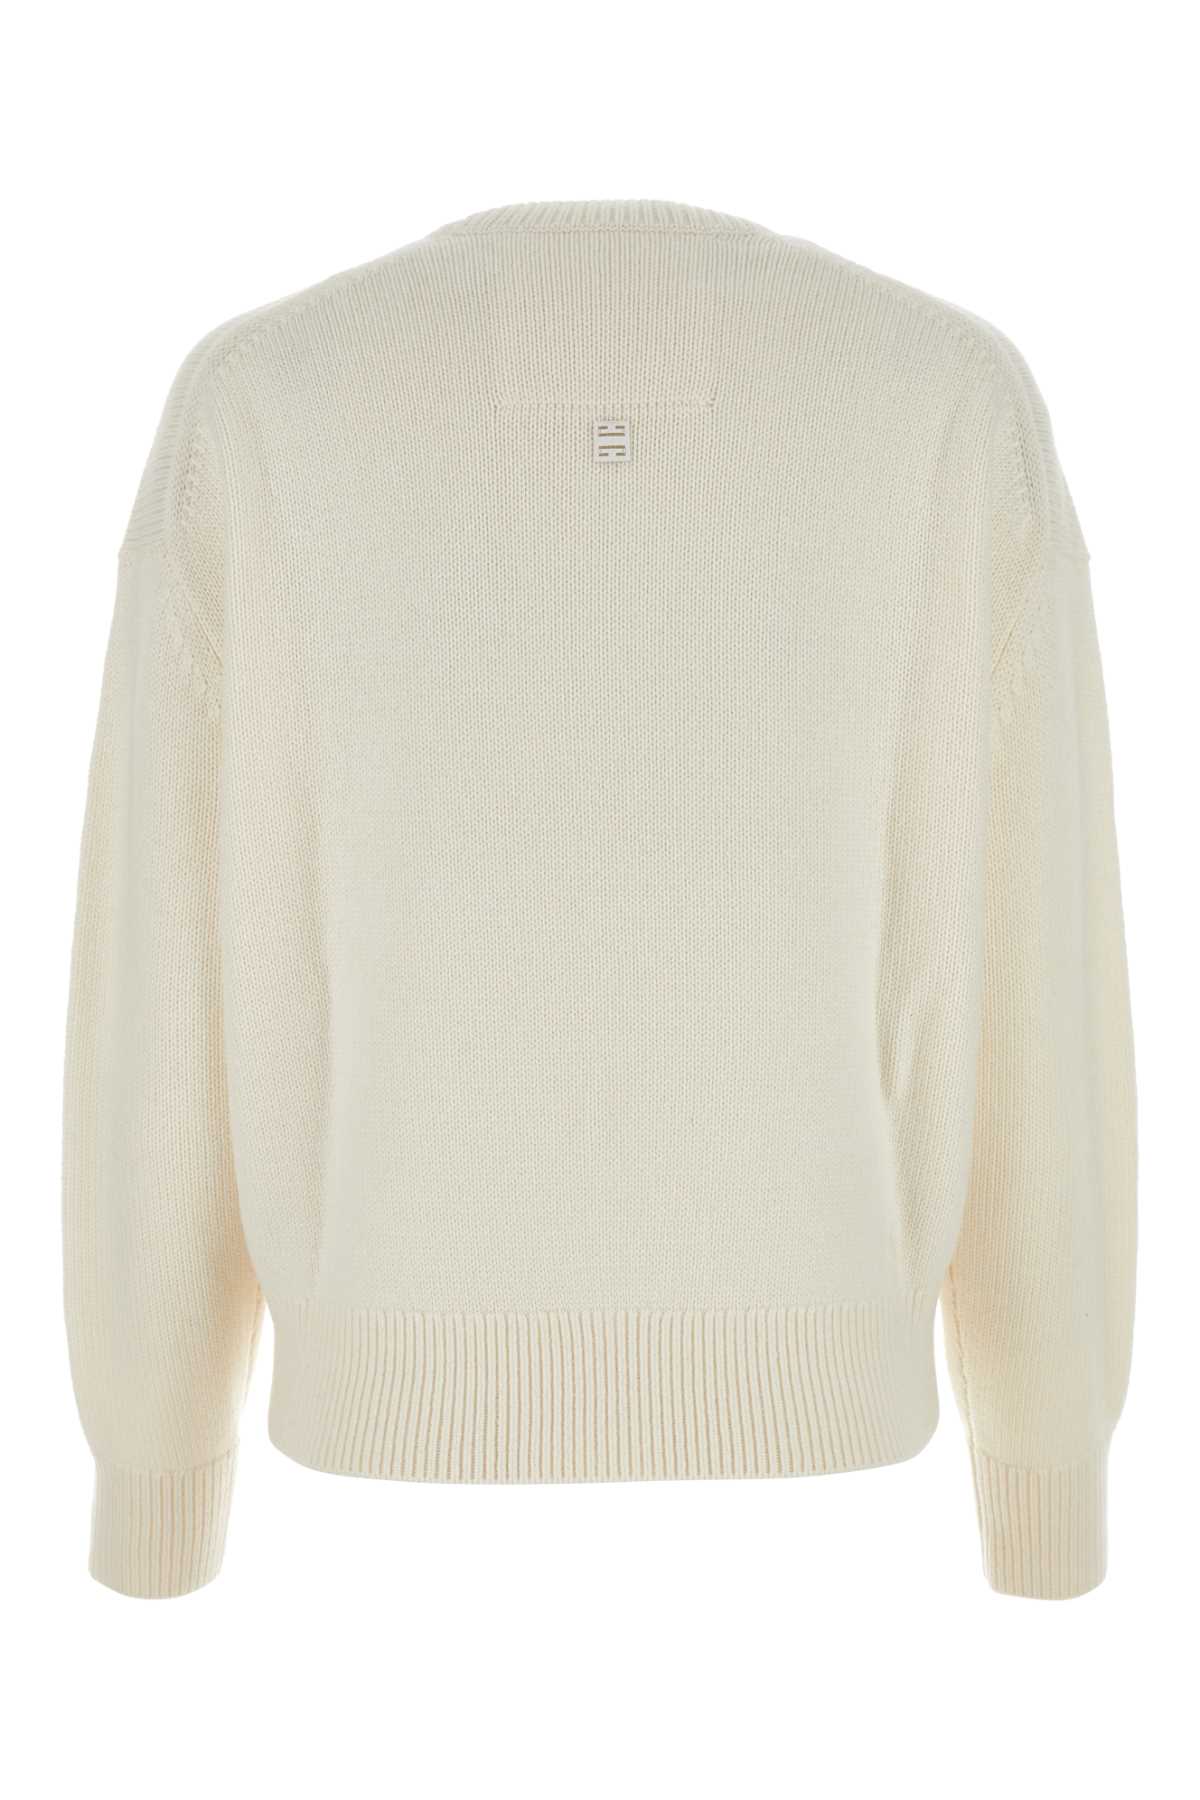 GIVENCHY IVORY CASHMERE SWEATER